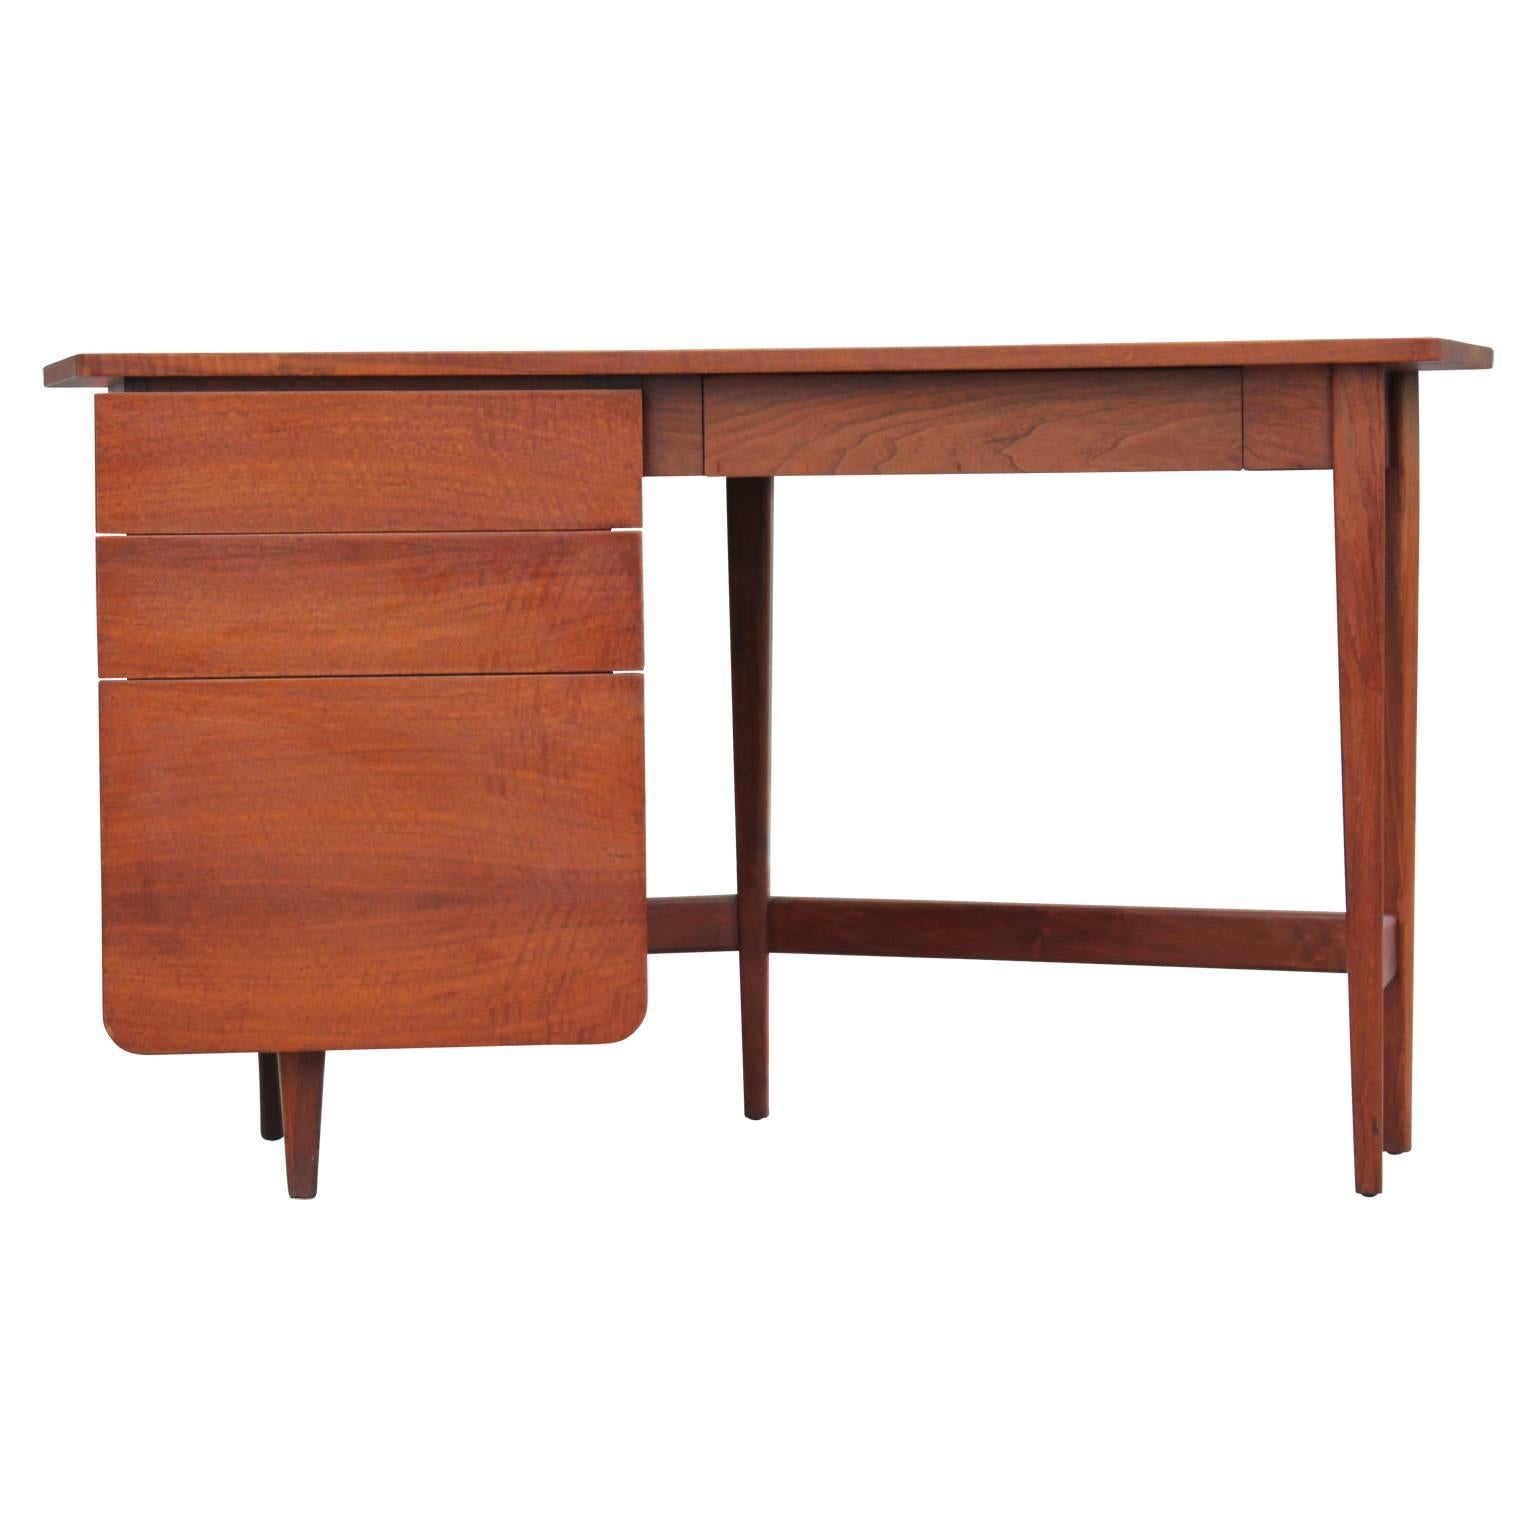 Gorgeous and rare Italian walnut desk designed by Bertha Schaefer in collaboration with Gio Ponti for Singer and Sons in the 1950s. Extremely sleek and clean lined, making for a stunning addition to any room.